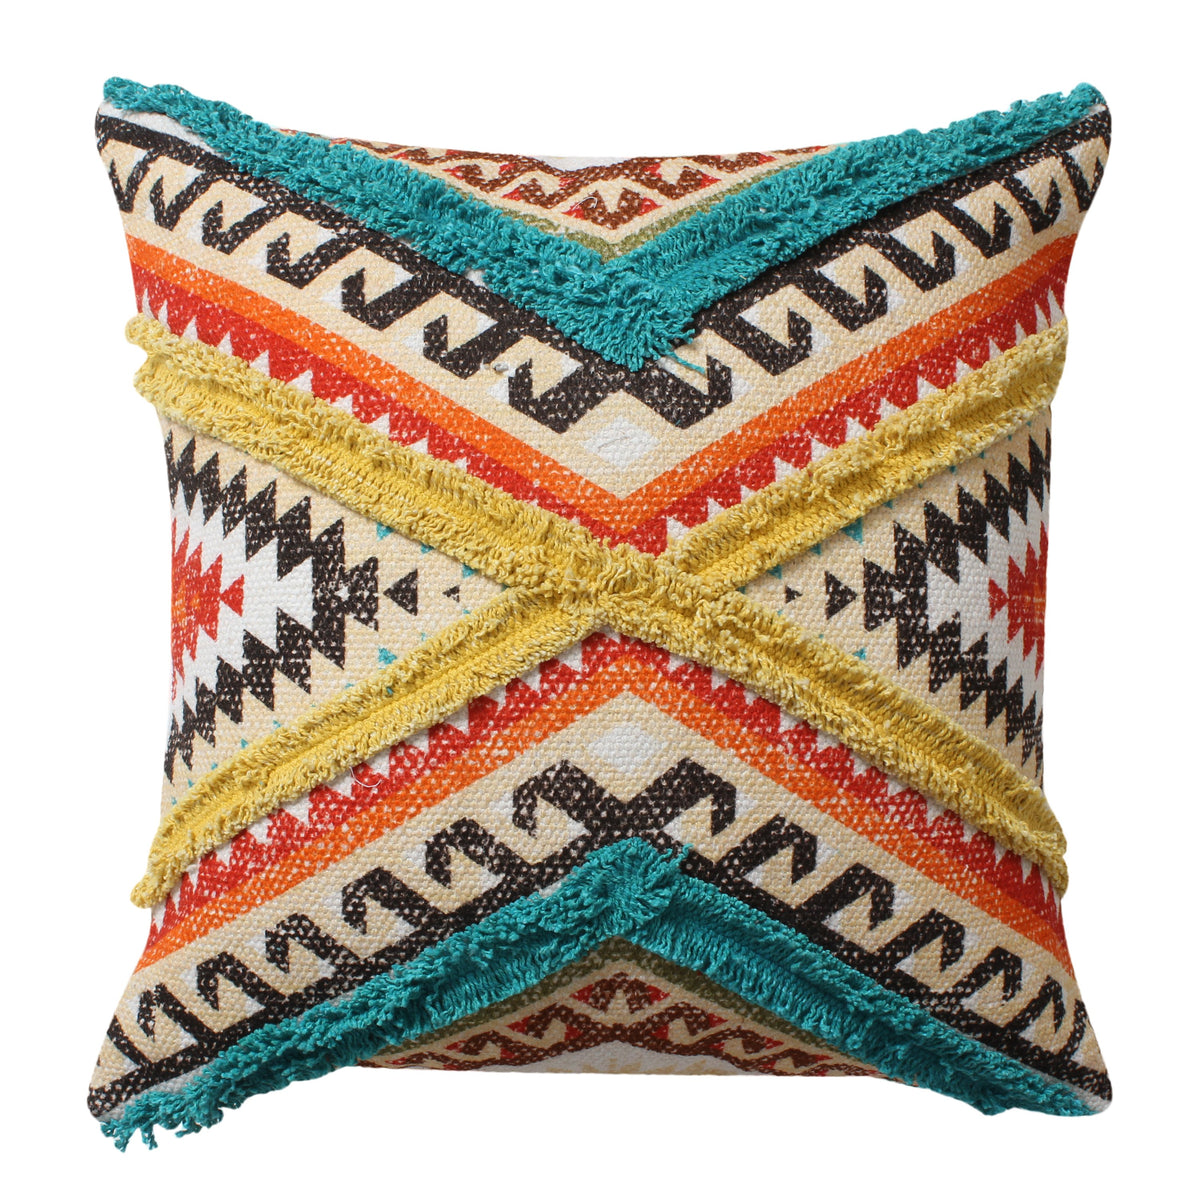 18 x 18 Square Cotton Accent Throw Pillow, Aztec Tribal Inspired Pattern, Trimmed Fringes, Multicolor - BM221647